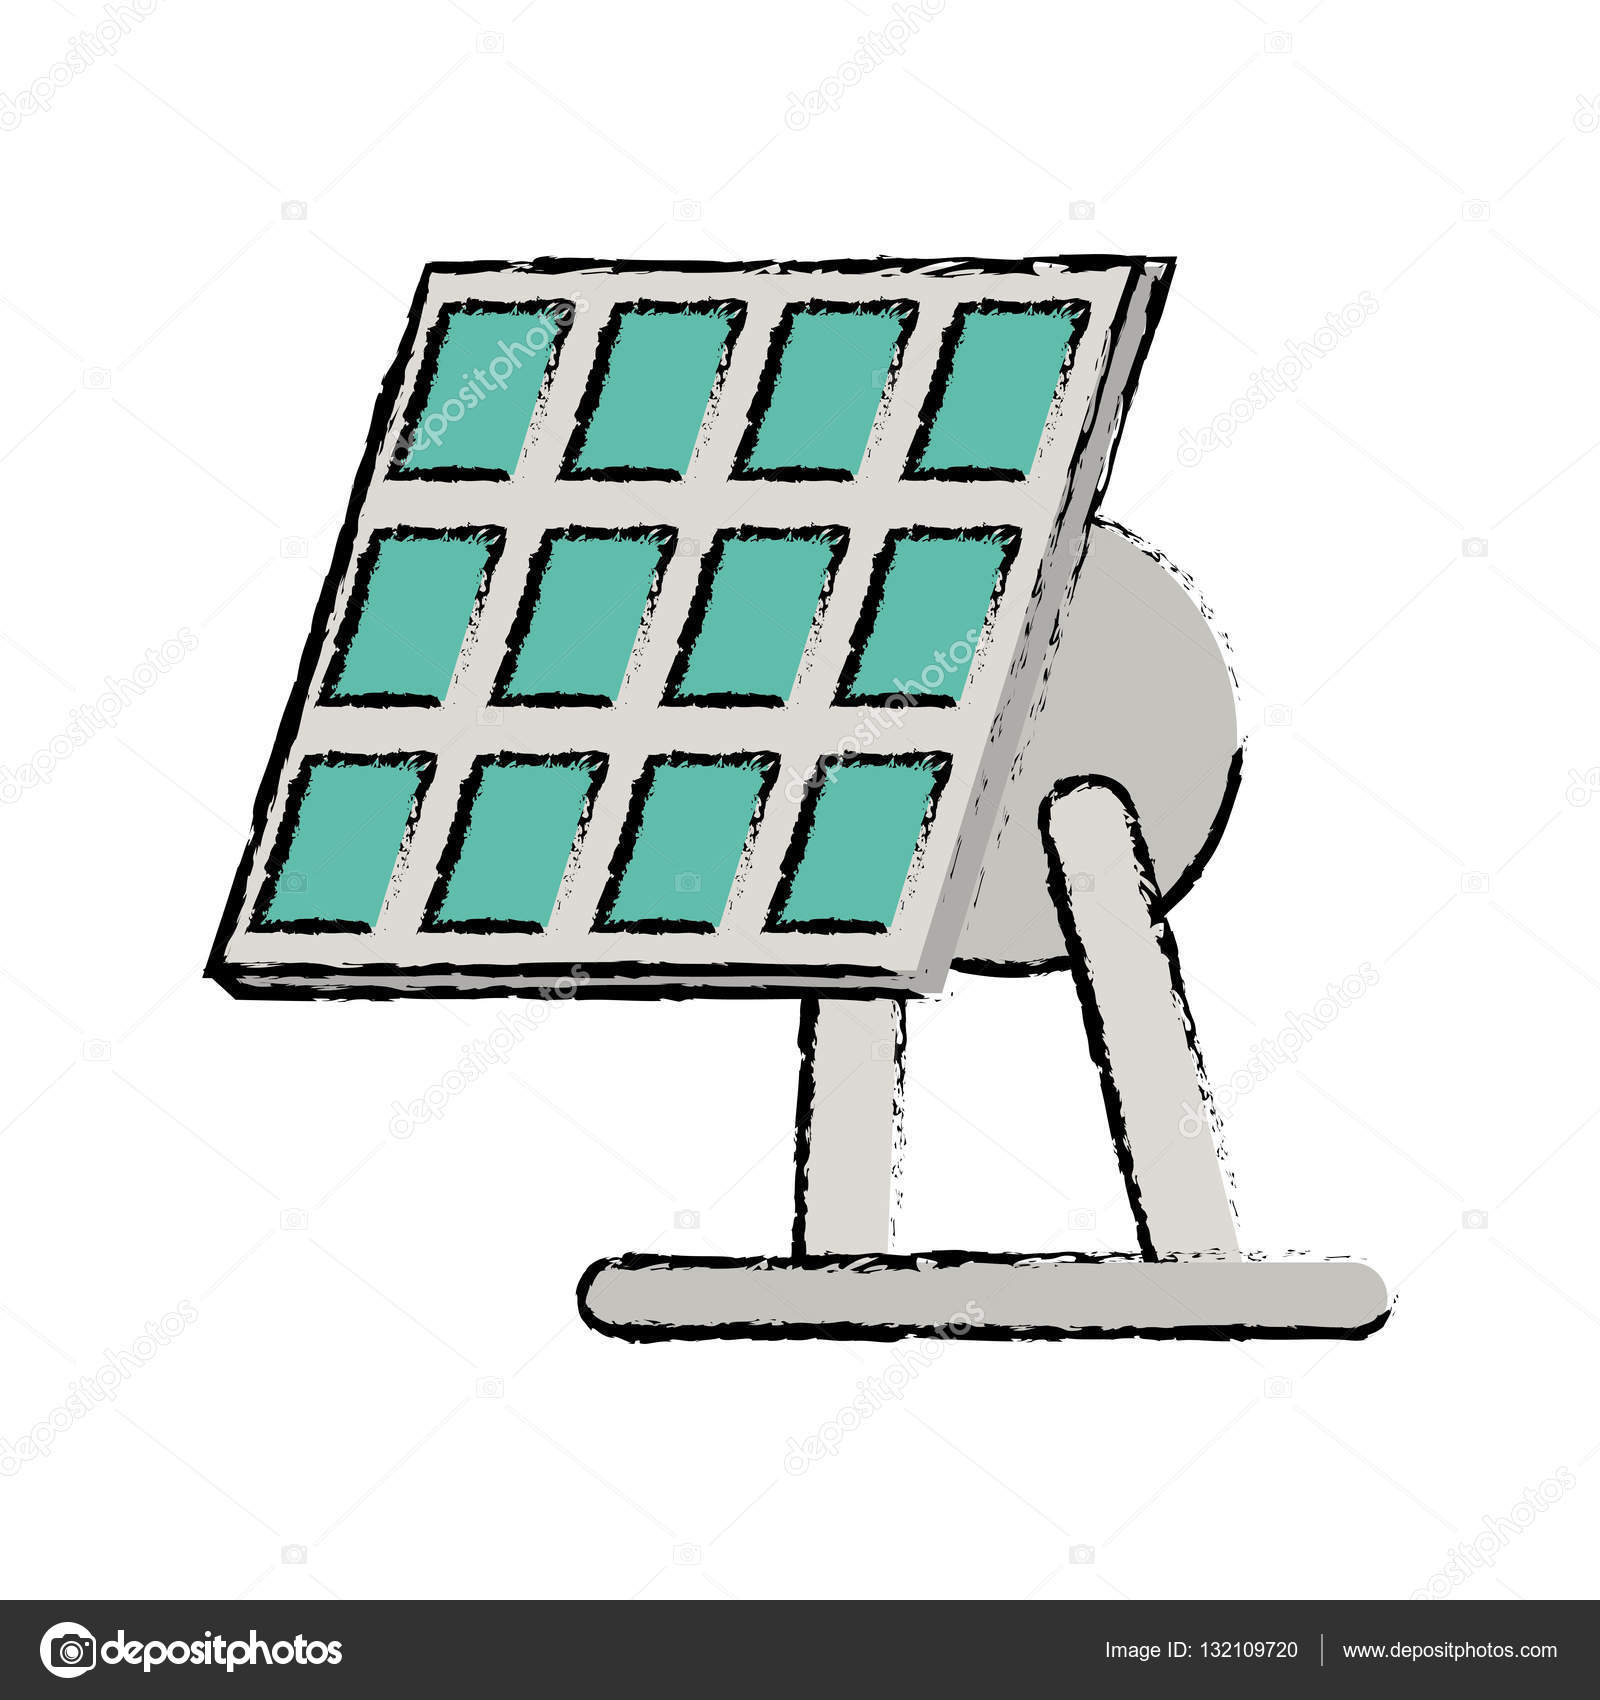 solar-panel-drawing-pdf-schematics-wiring-solar-panels-and-batteries